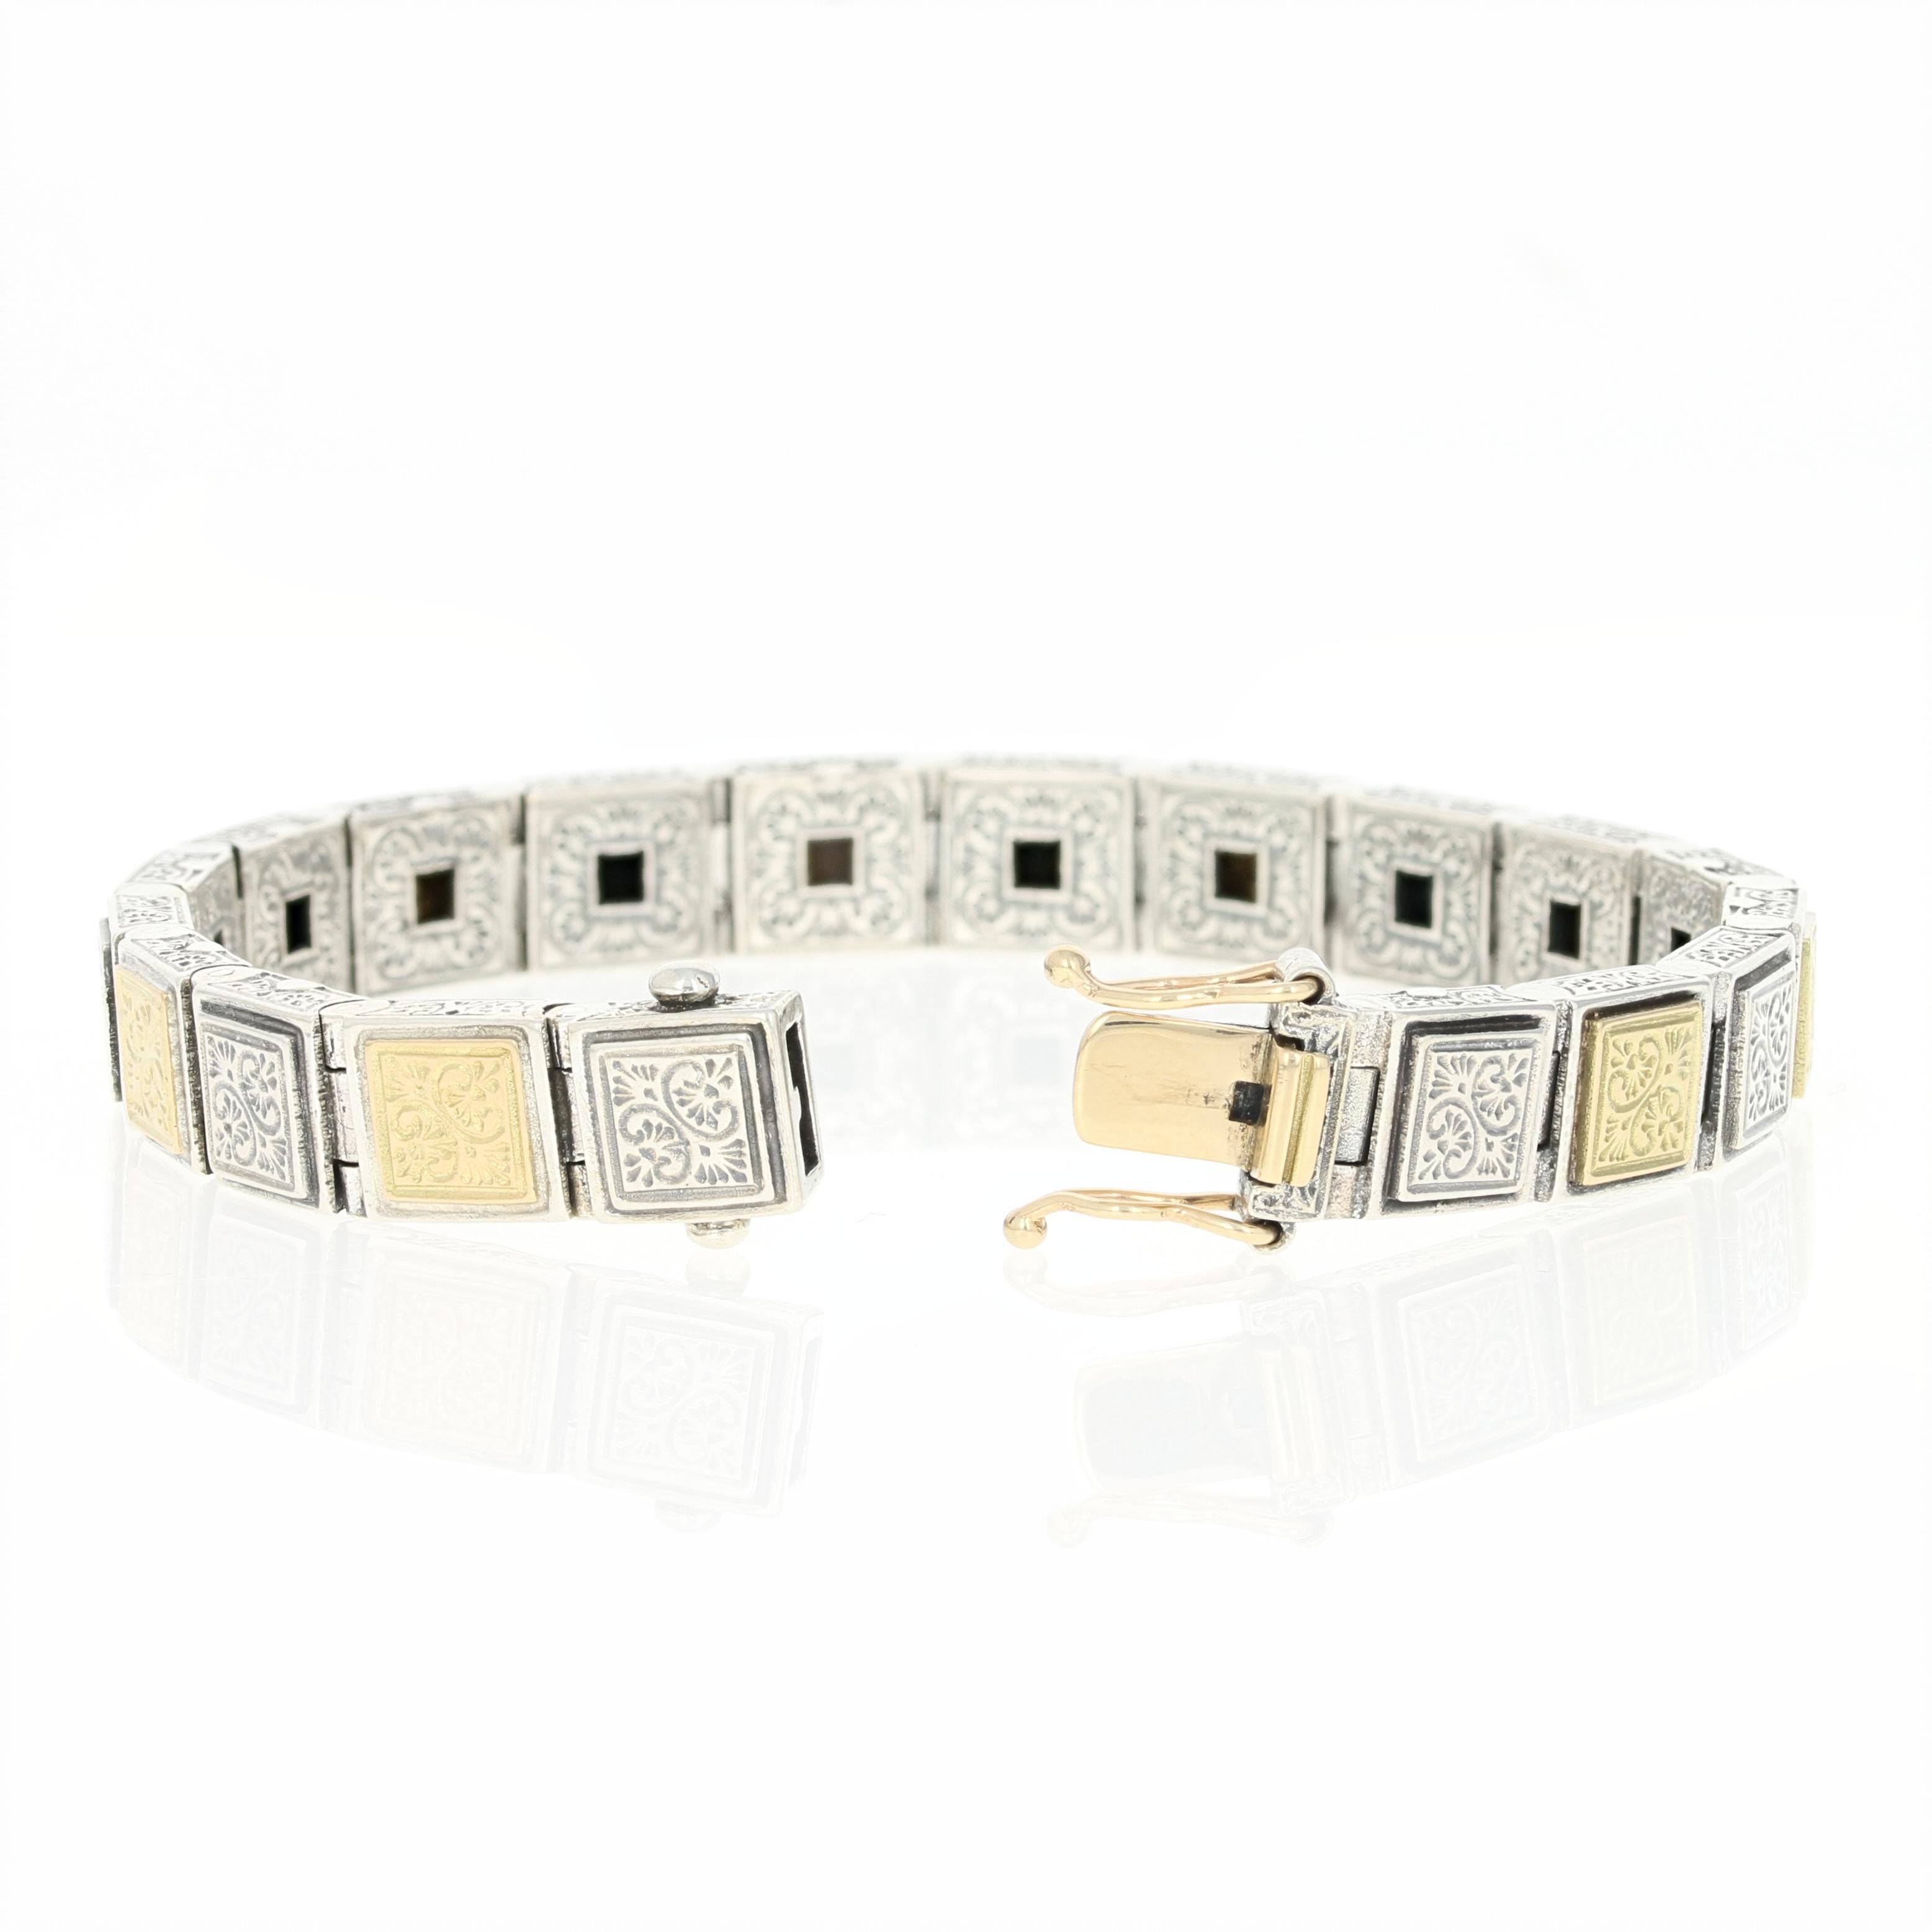 This gorgeous bracelet is destined to become a signature piece in your fine jewelry collection! Beautifully created by Konstantino, this sterling silver and 18k yellow gold piece features square links to create a streamlined silhouette that is